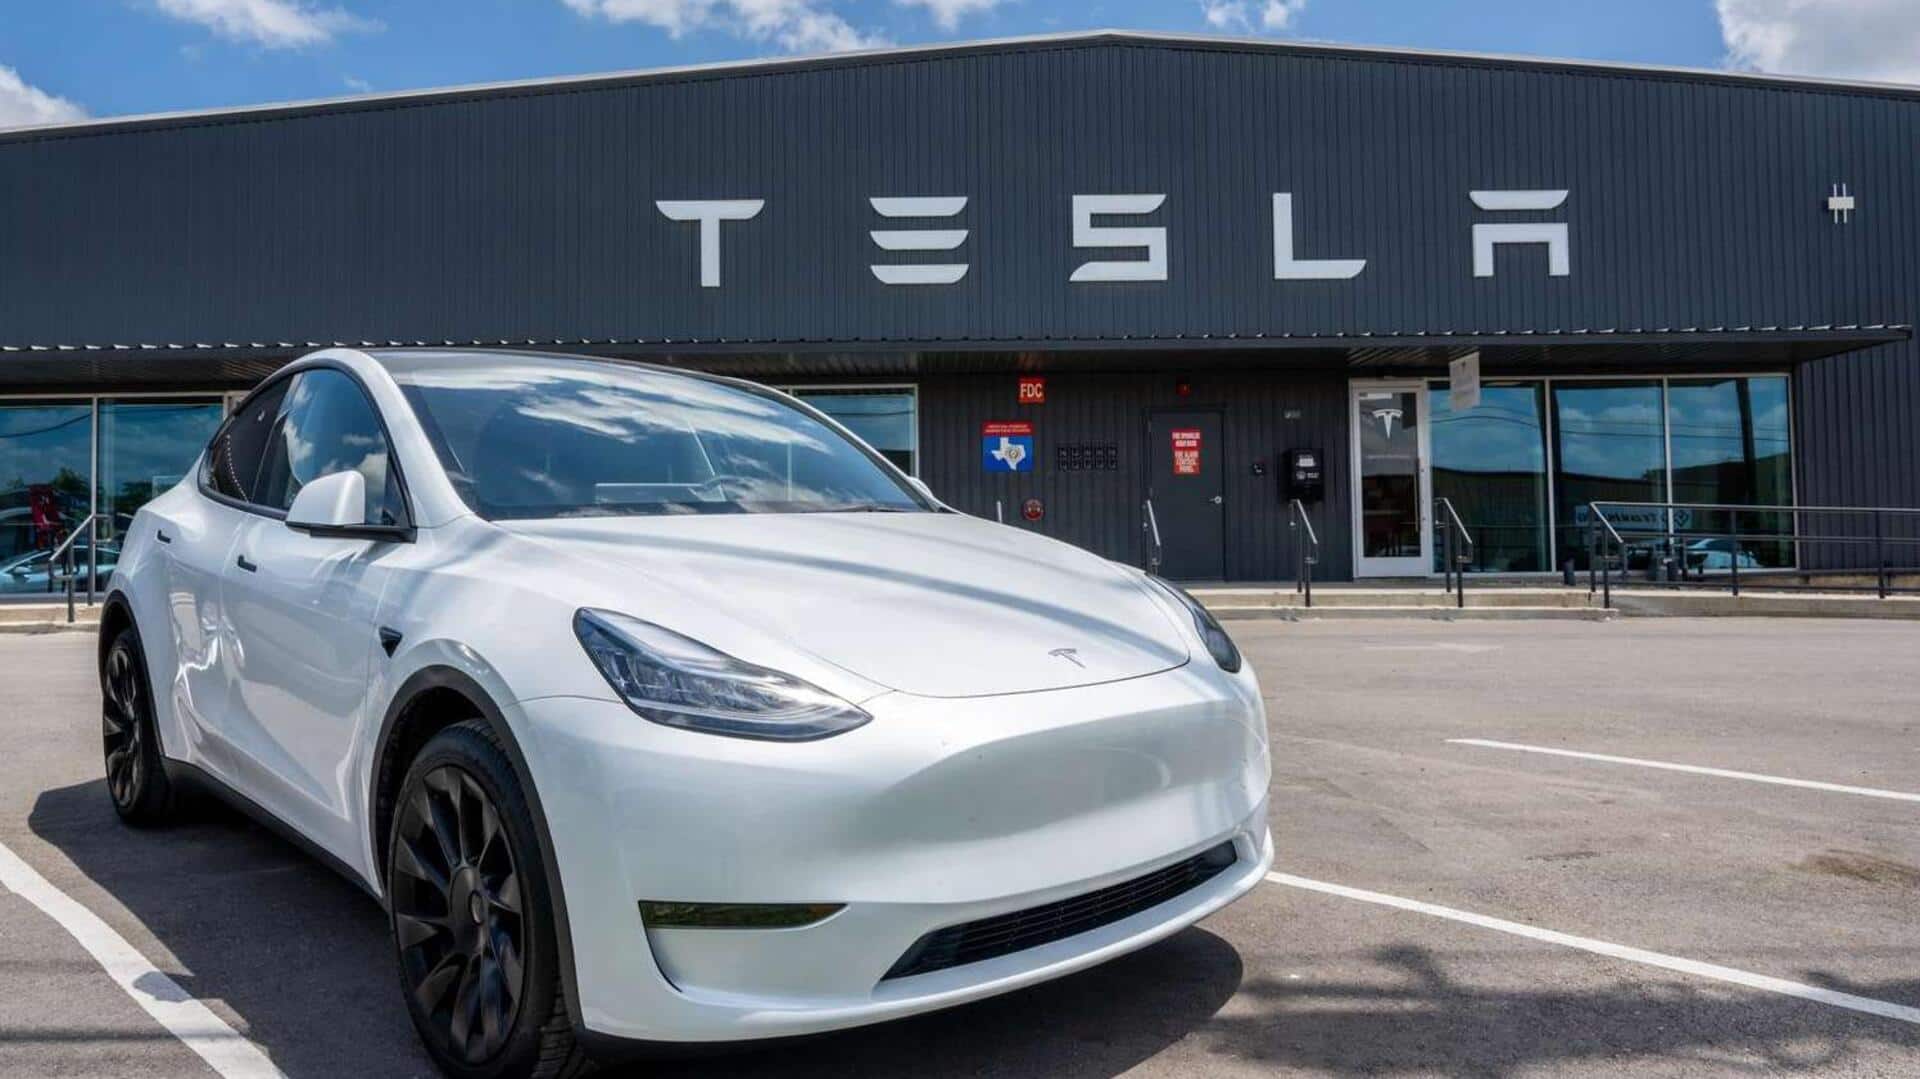 Where Tesla will establish its production facility in India